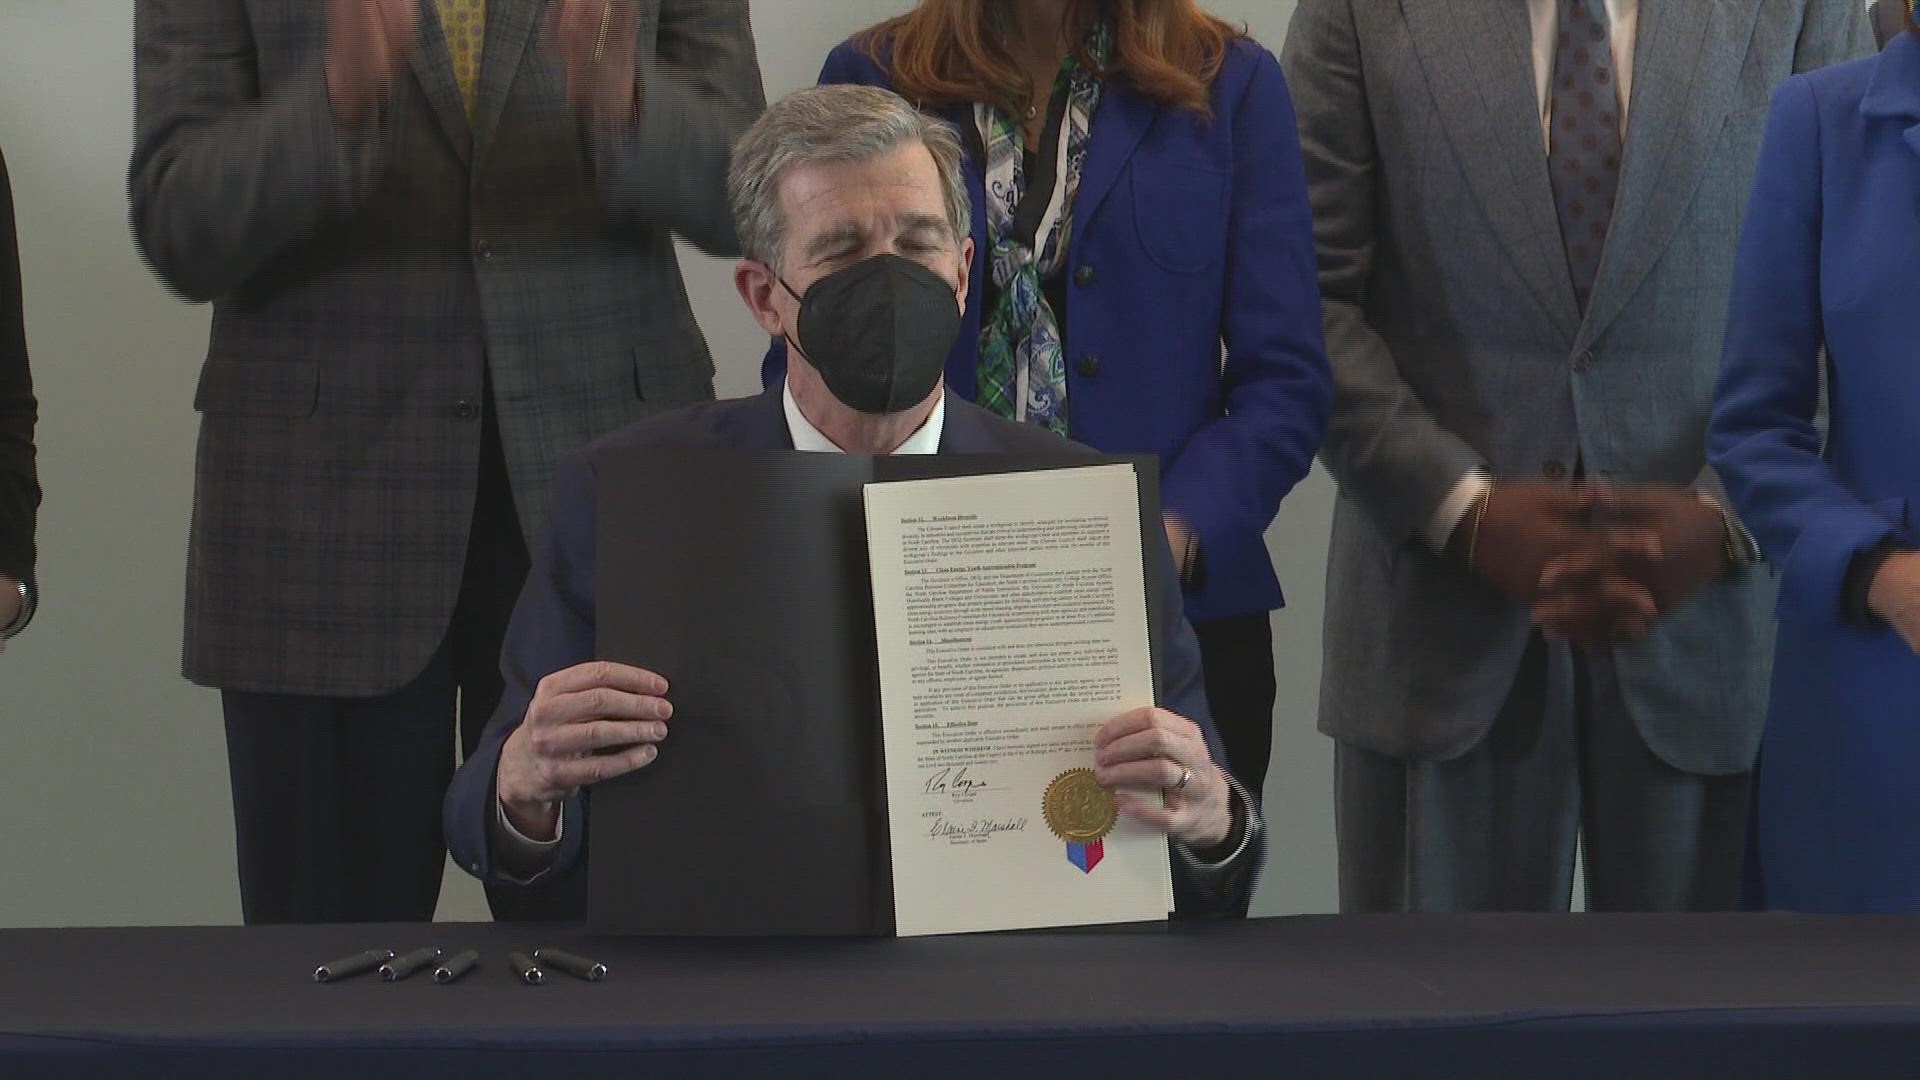 North Carolina Governor Roy Cooper signed an executive order Friday saying the state will achieve net-zero emissions by 2050.